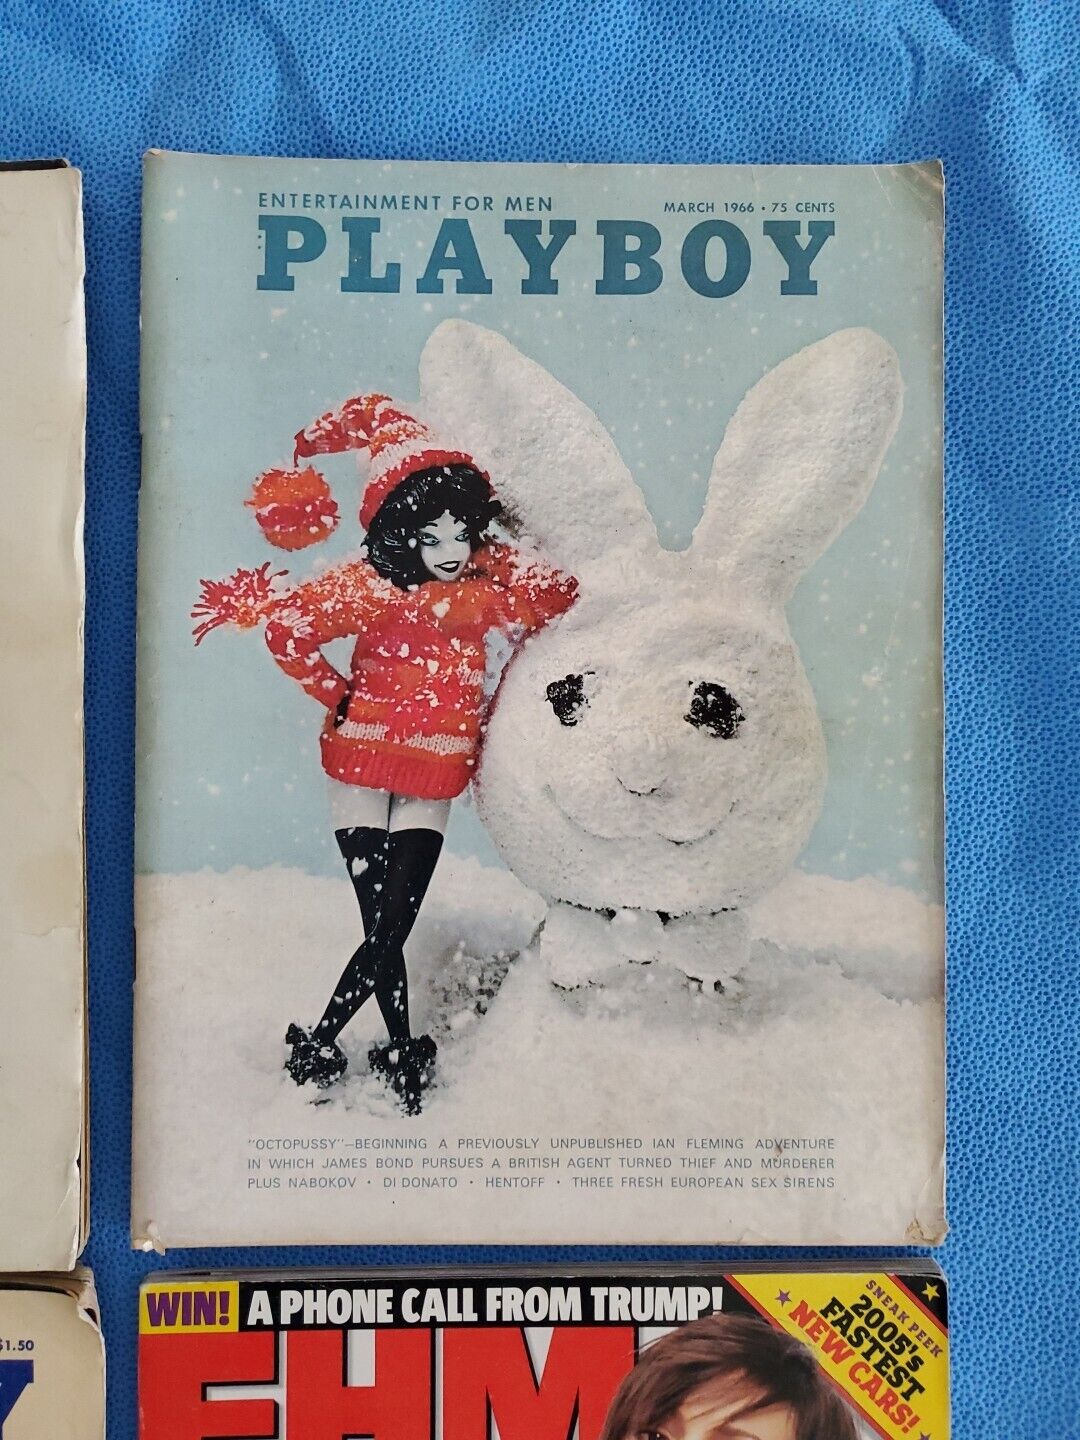 Playboy Magazine Vintage From 1960s And 1970s